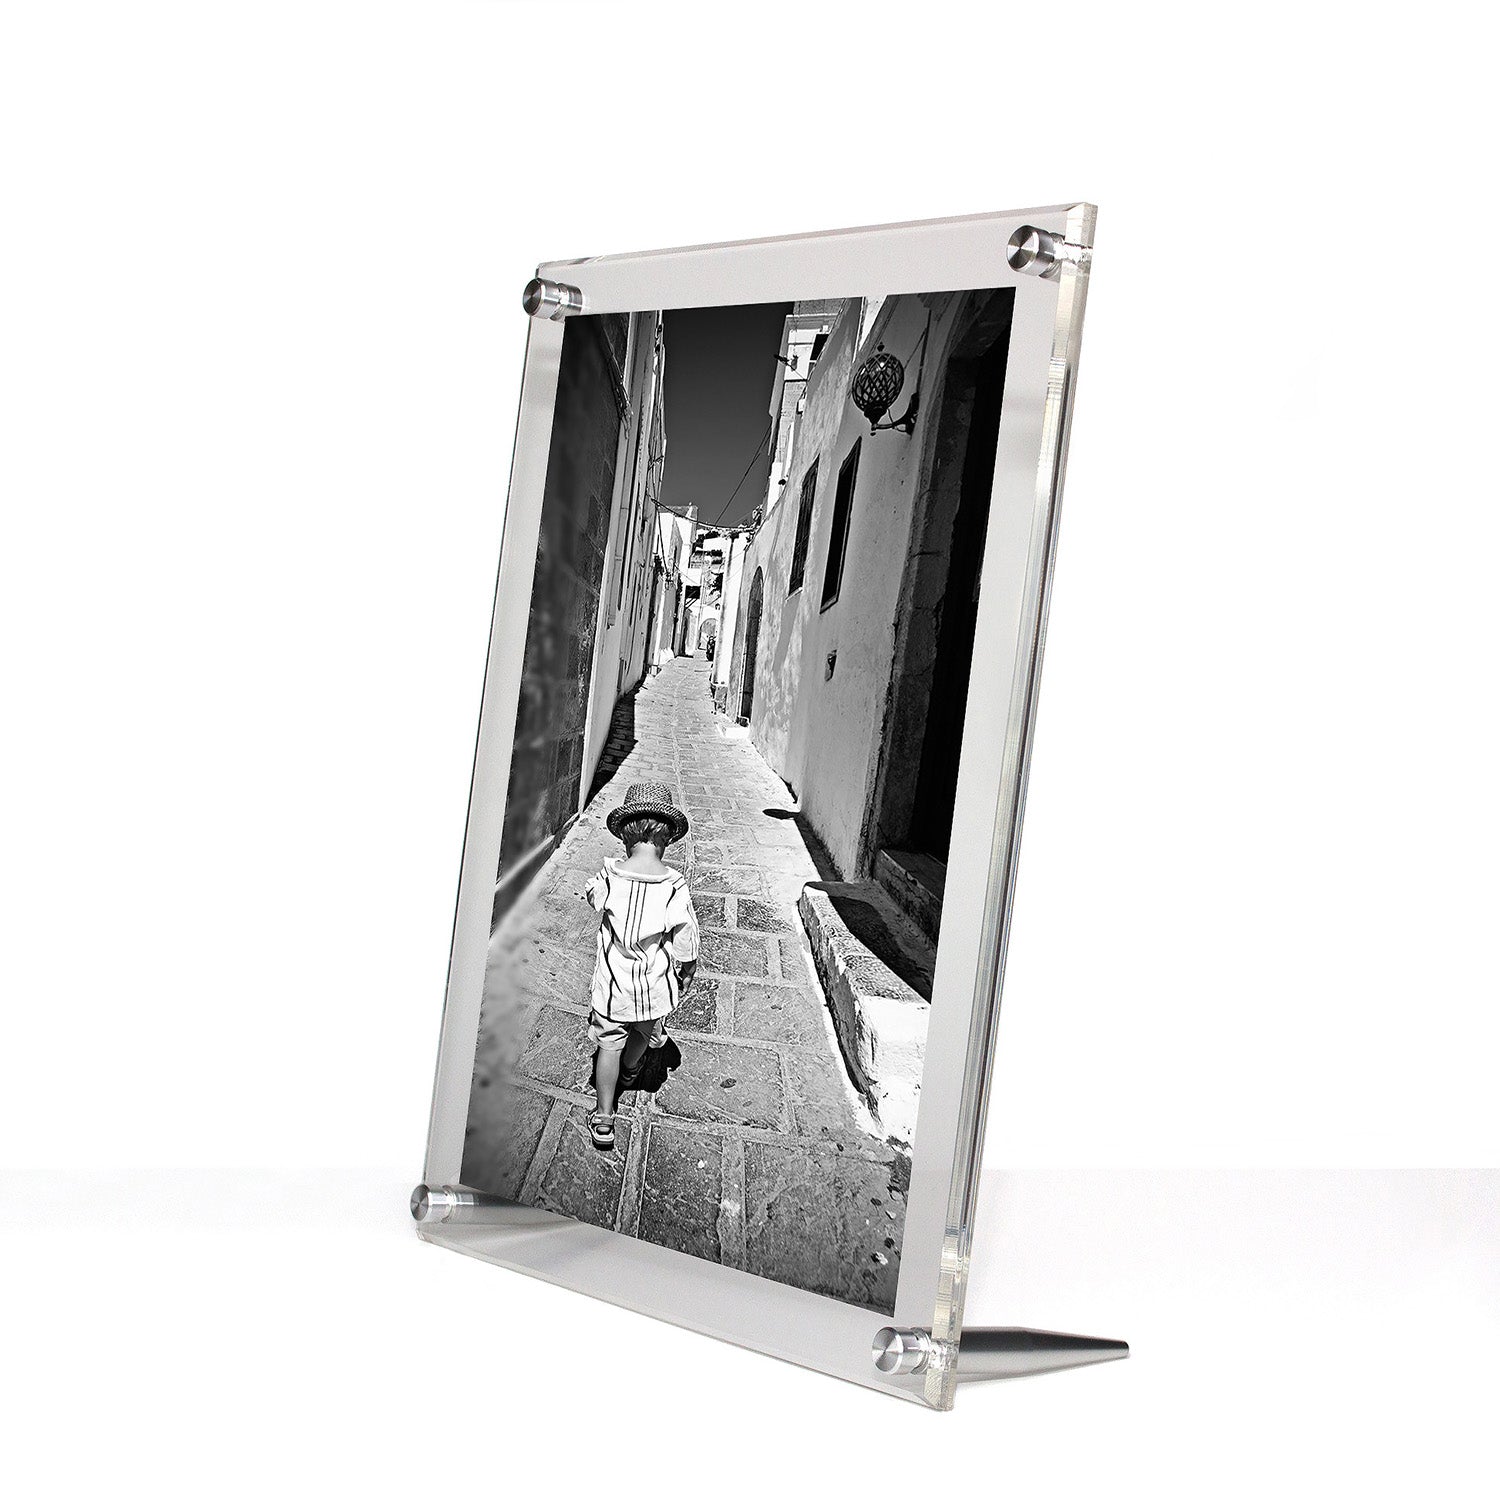 POPSTER Floating Acrylic 19x23/16x20 Frame by Wexel Art® (Silver hardware)  - Picture Frames, Photo Albums, Personalized and Engraved Digital Photo  Gifts - SendAFrame